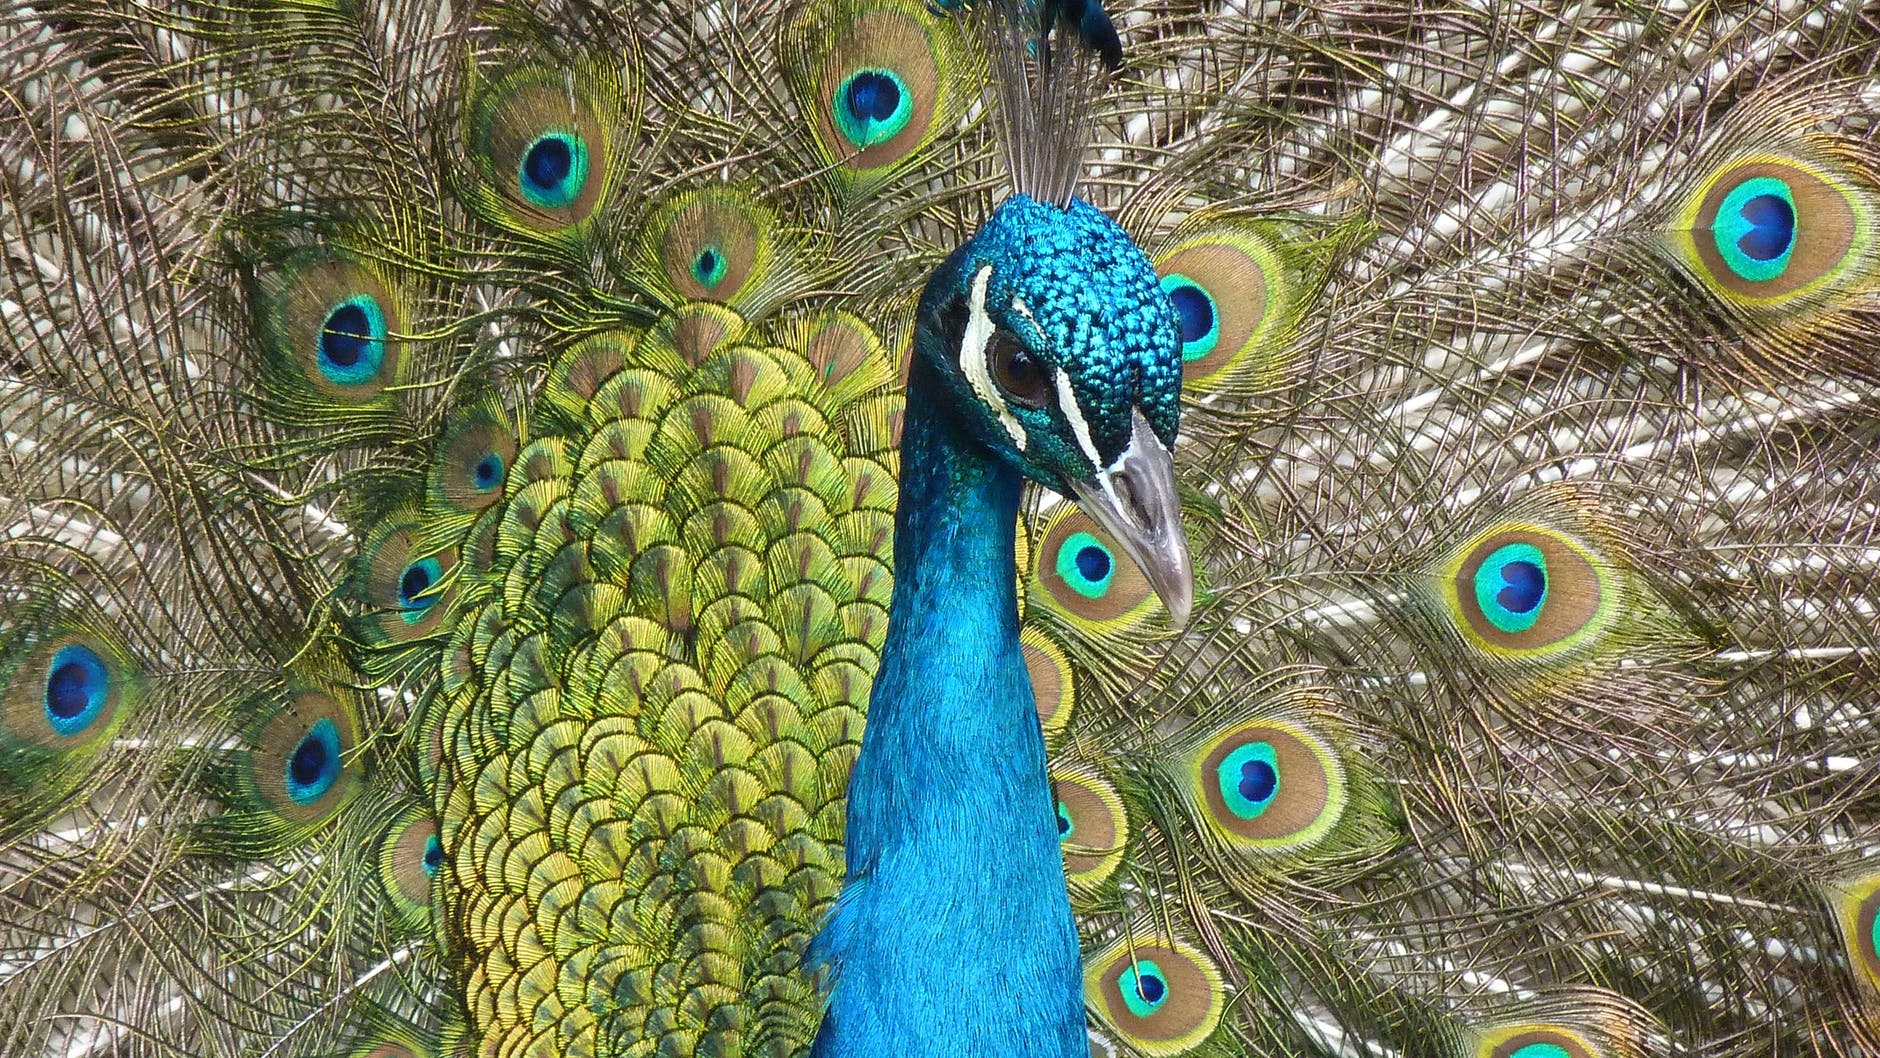 What does a peacock symbolize?